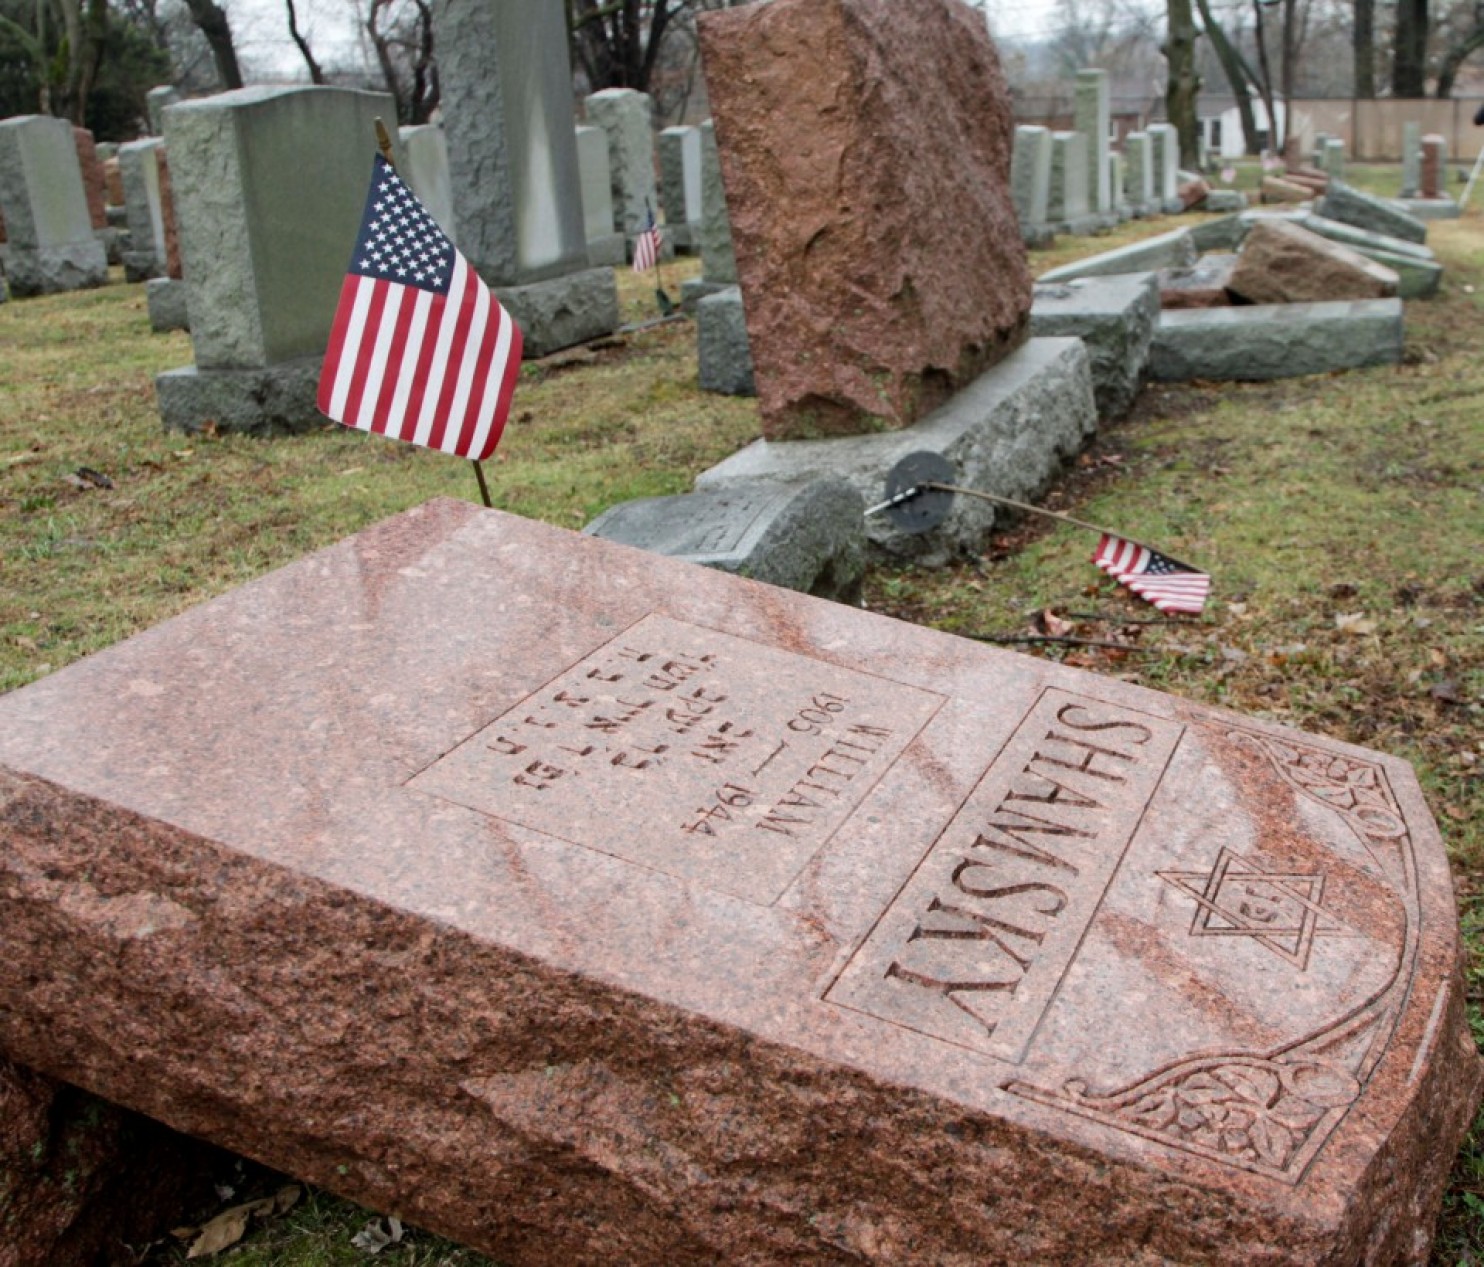 ‘Every person deserves to rest in peace': American Muslims raising money to repair vandalized Jewish cemetery